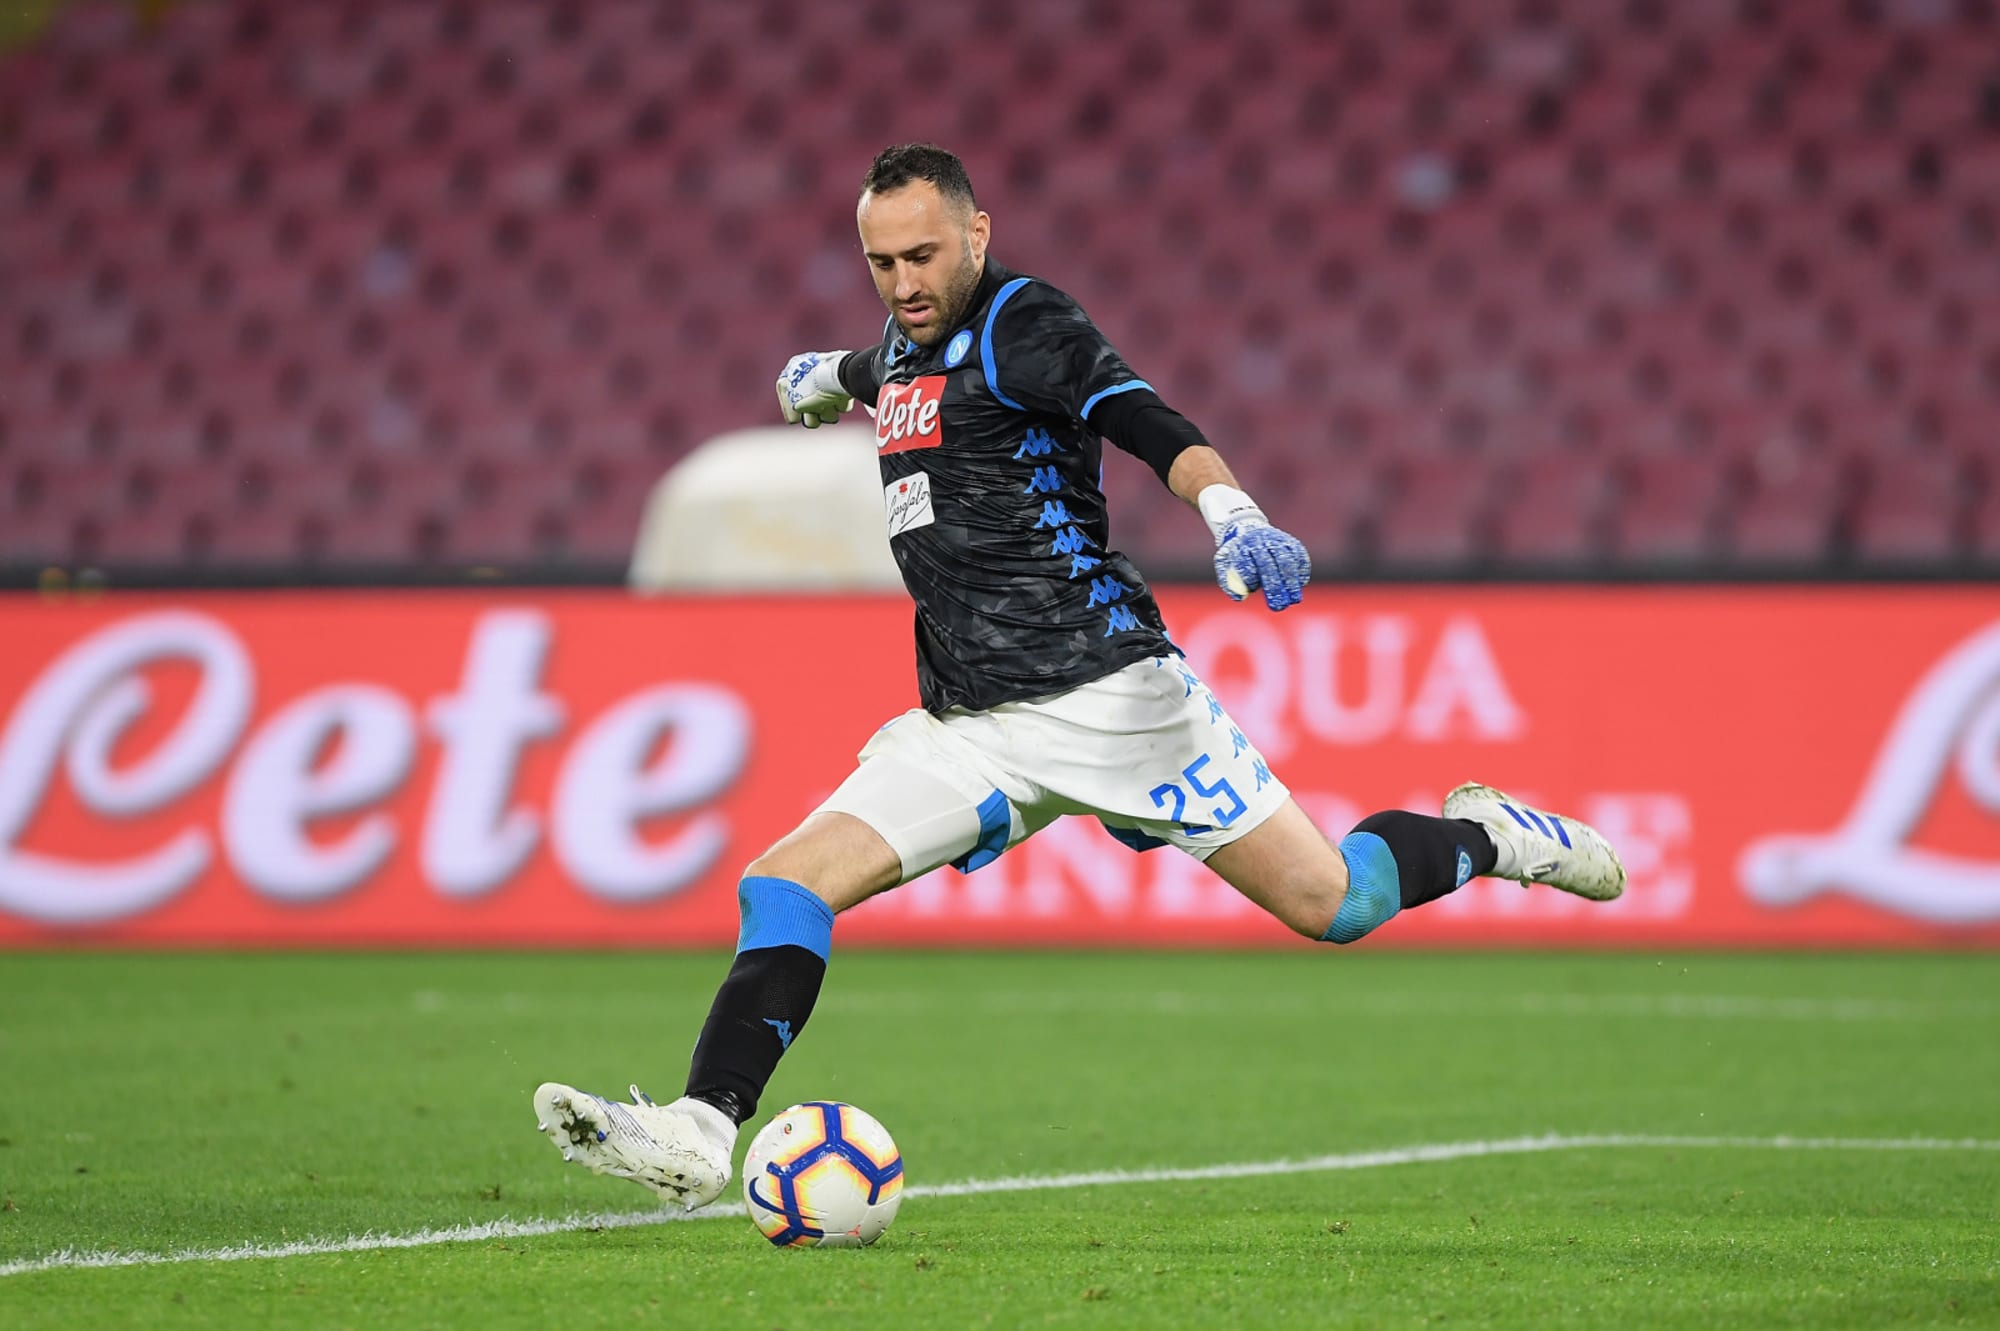 Arsenal: At least David Ospina sale shows improvement